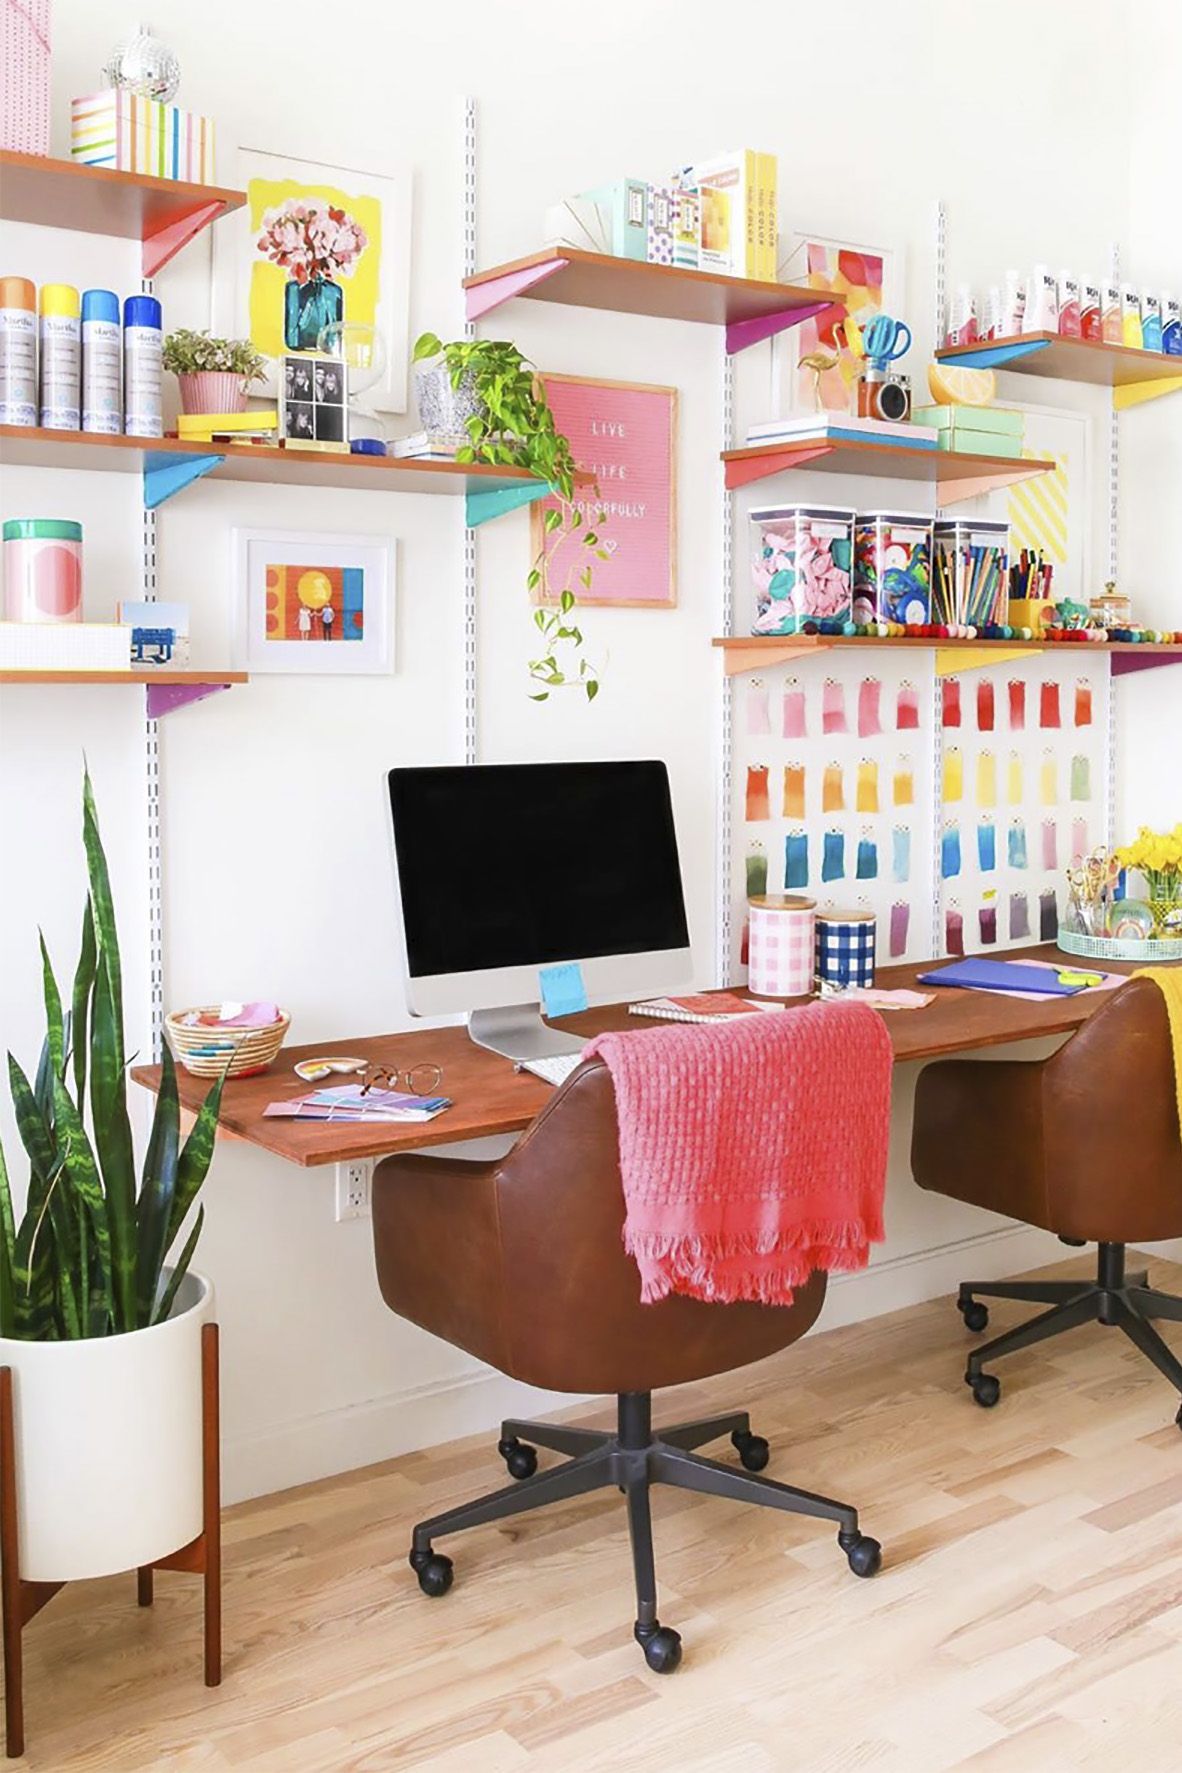 11 DIY Desk Organizer Ideas to make the most of your office space